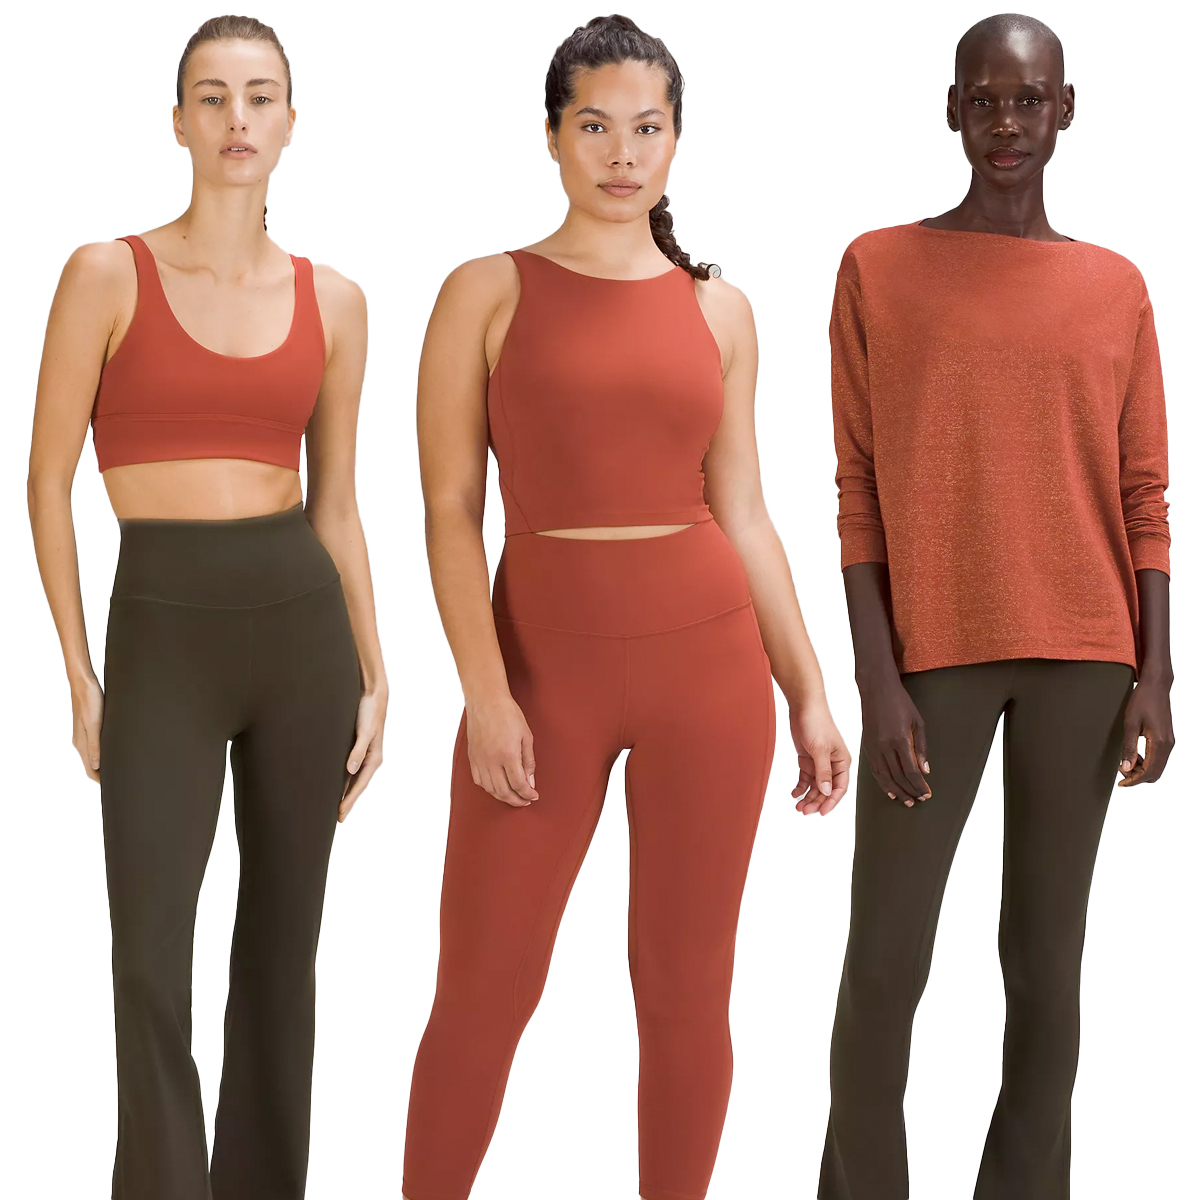 Lululemon's We Made Too Much: Top-rated Invigorate leggings are now $89